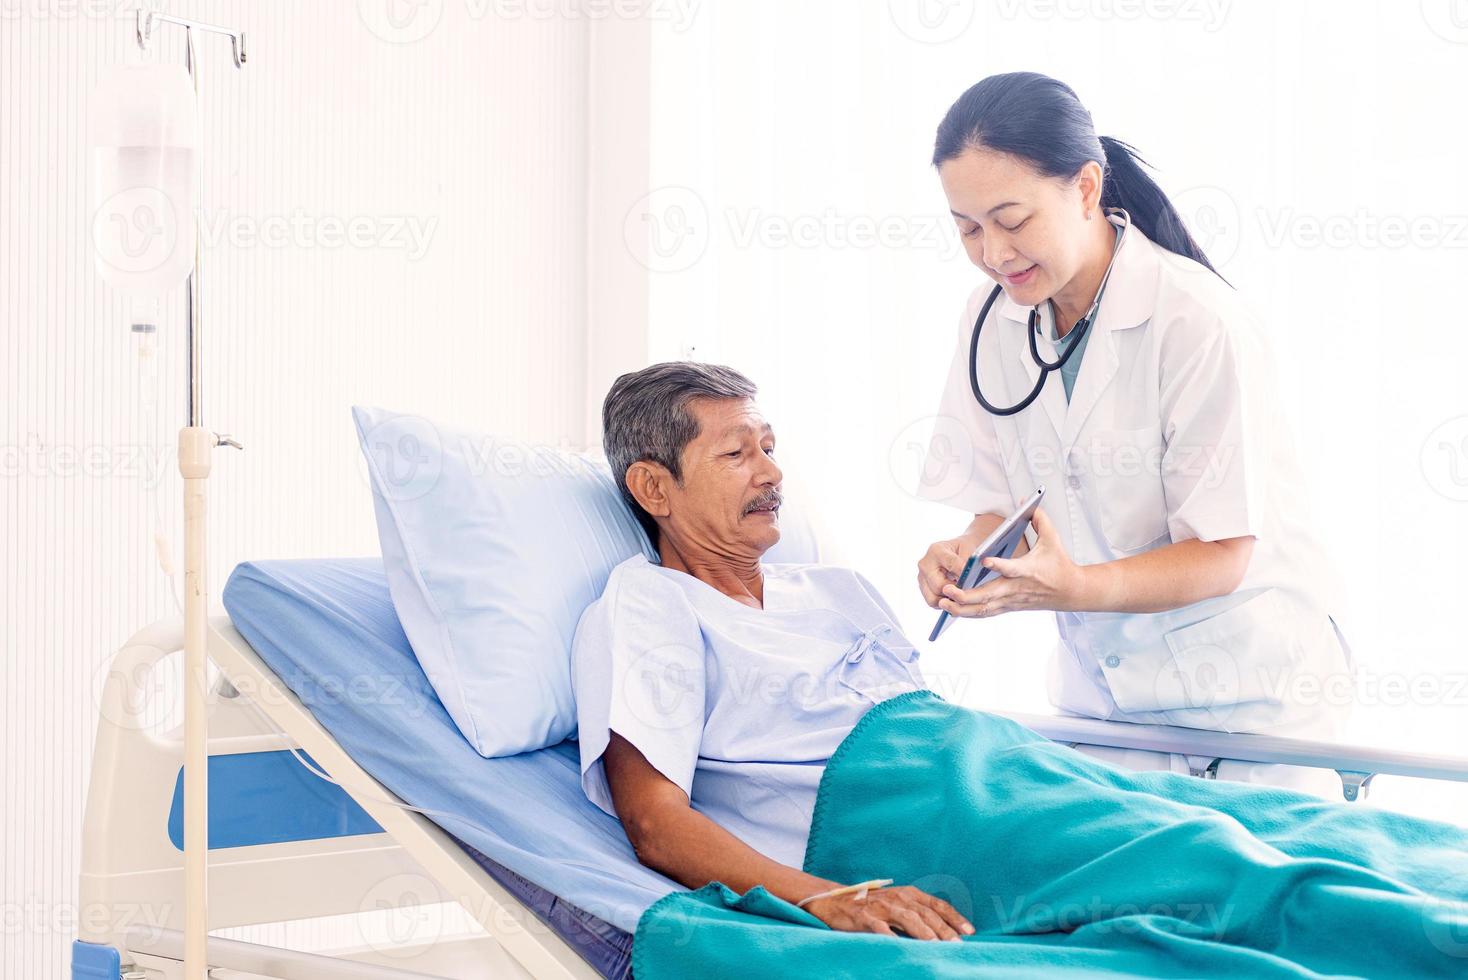 Asian woman professional doctor with clipboard visiting, talking, and diagnosing the old man patient lying in patient bed at hospital ward photo